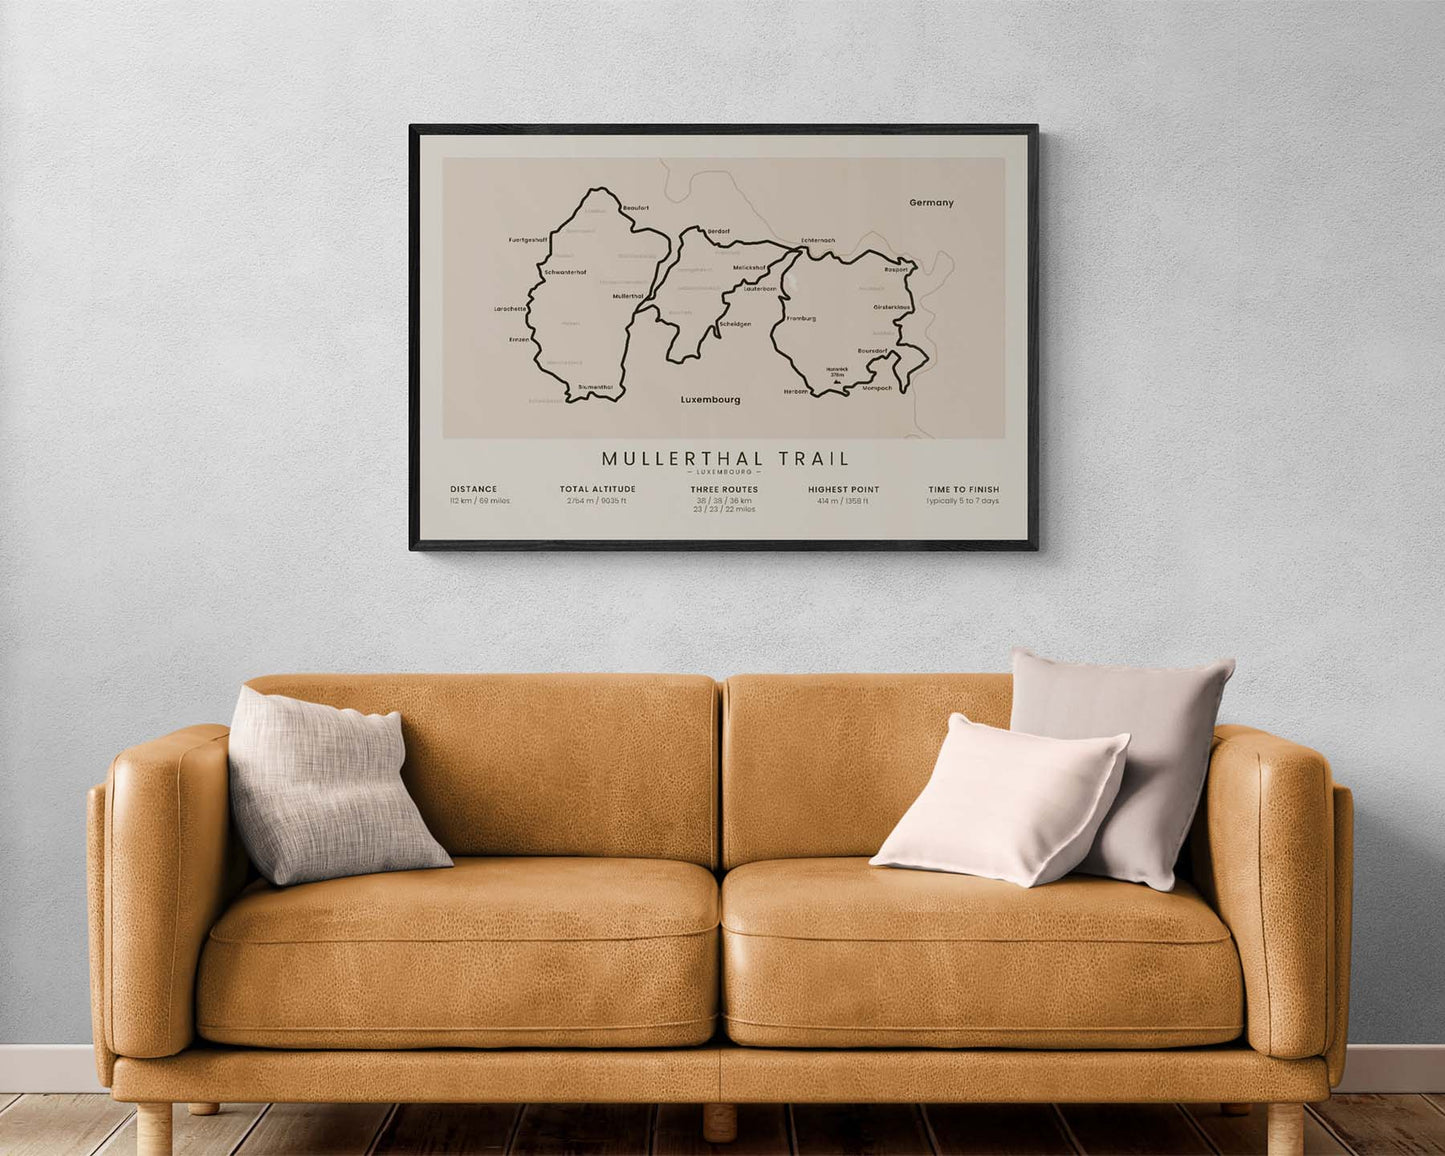 Mullerthal Trail (Route 1) Path Print in Minimal Room Decor